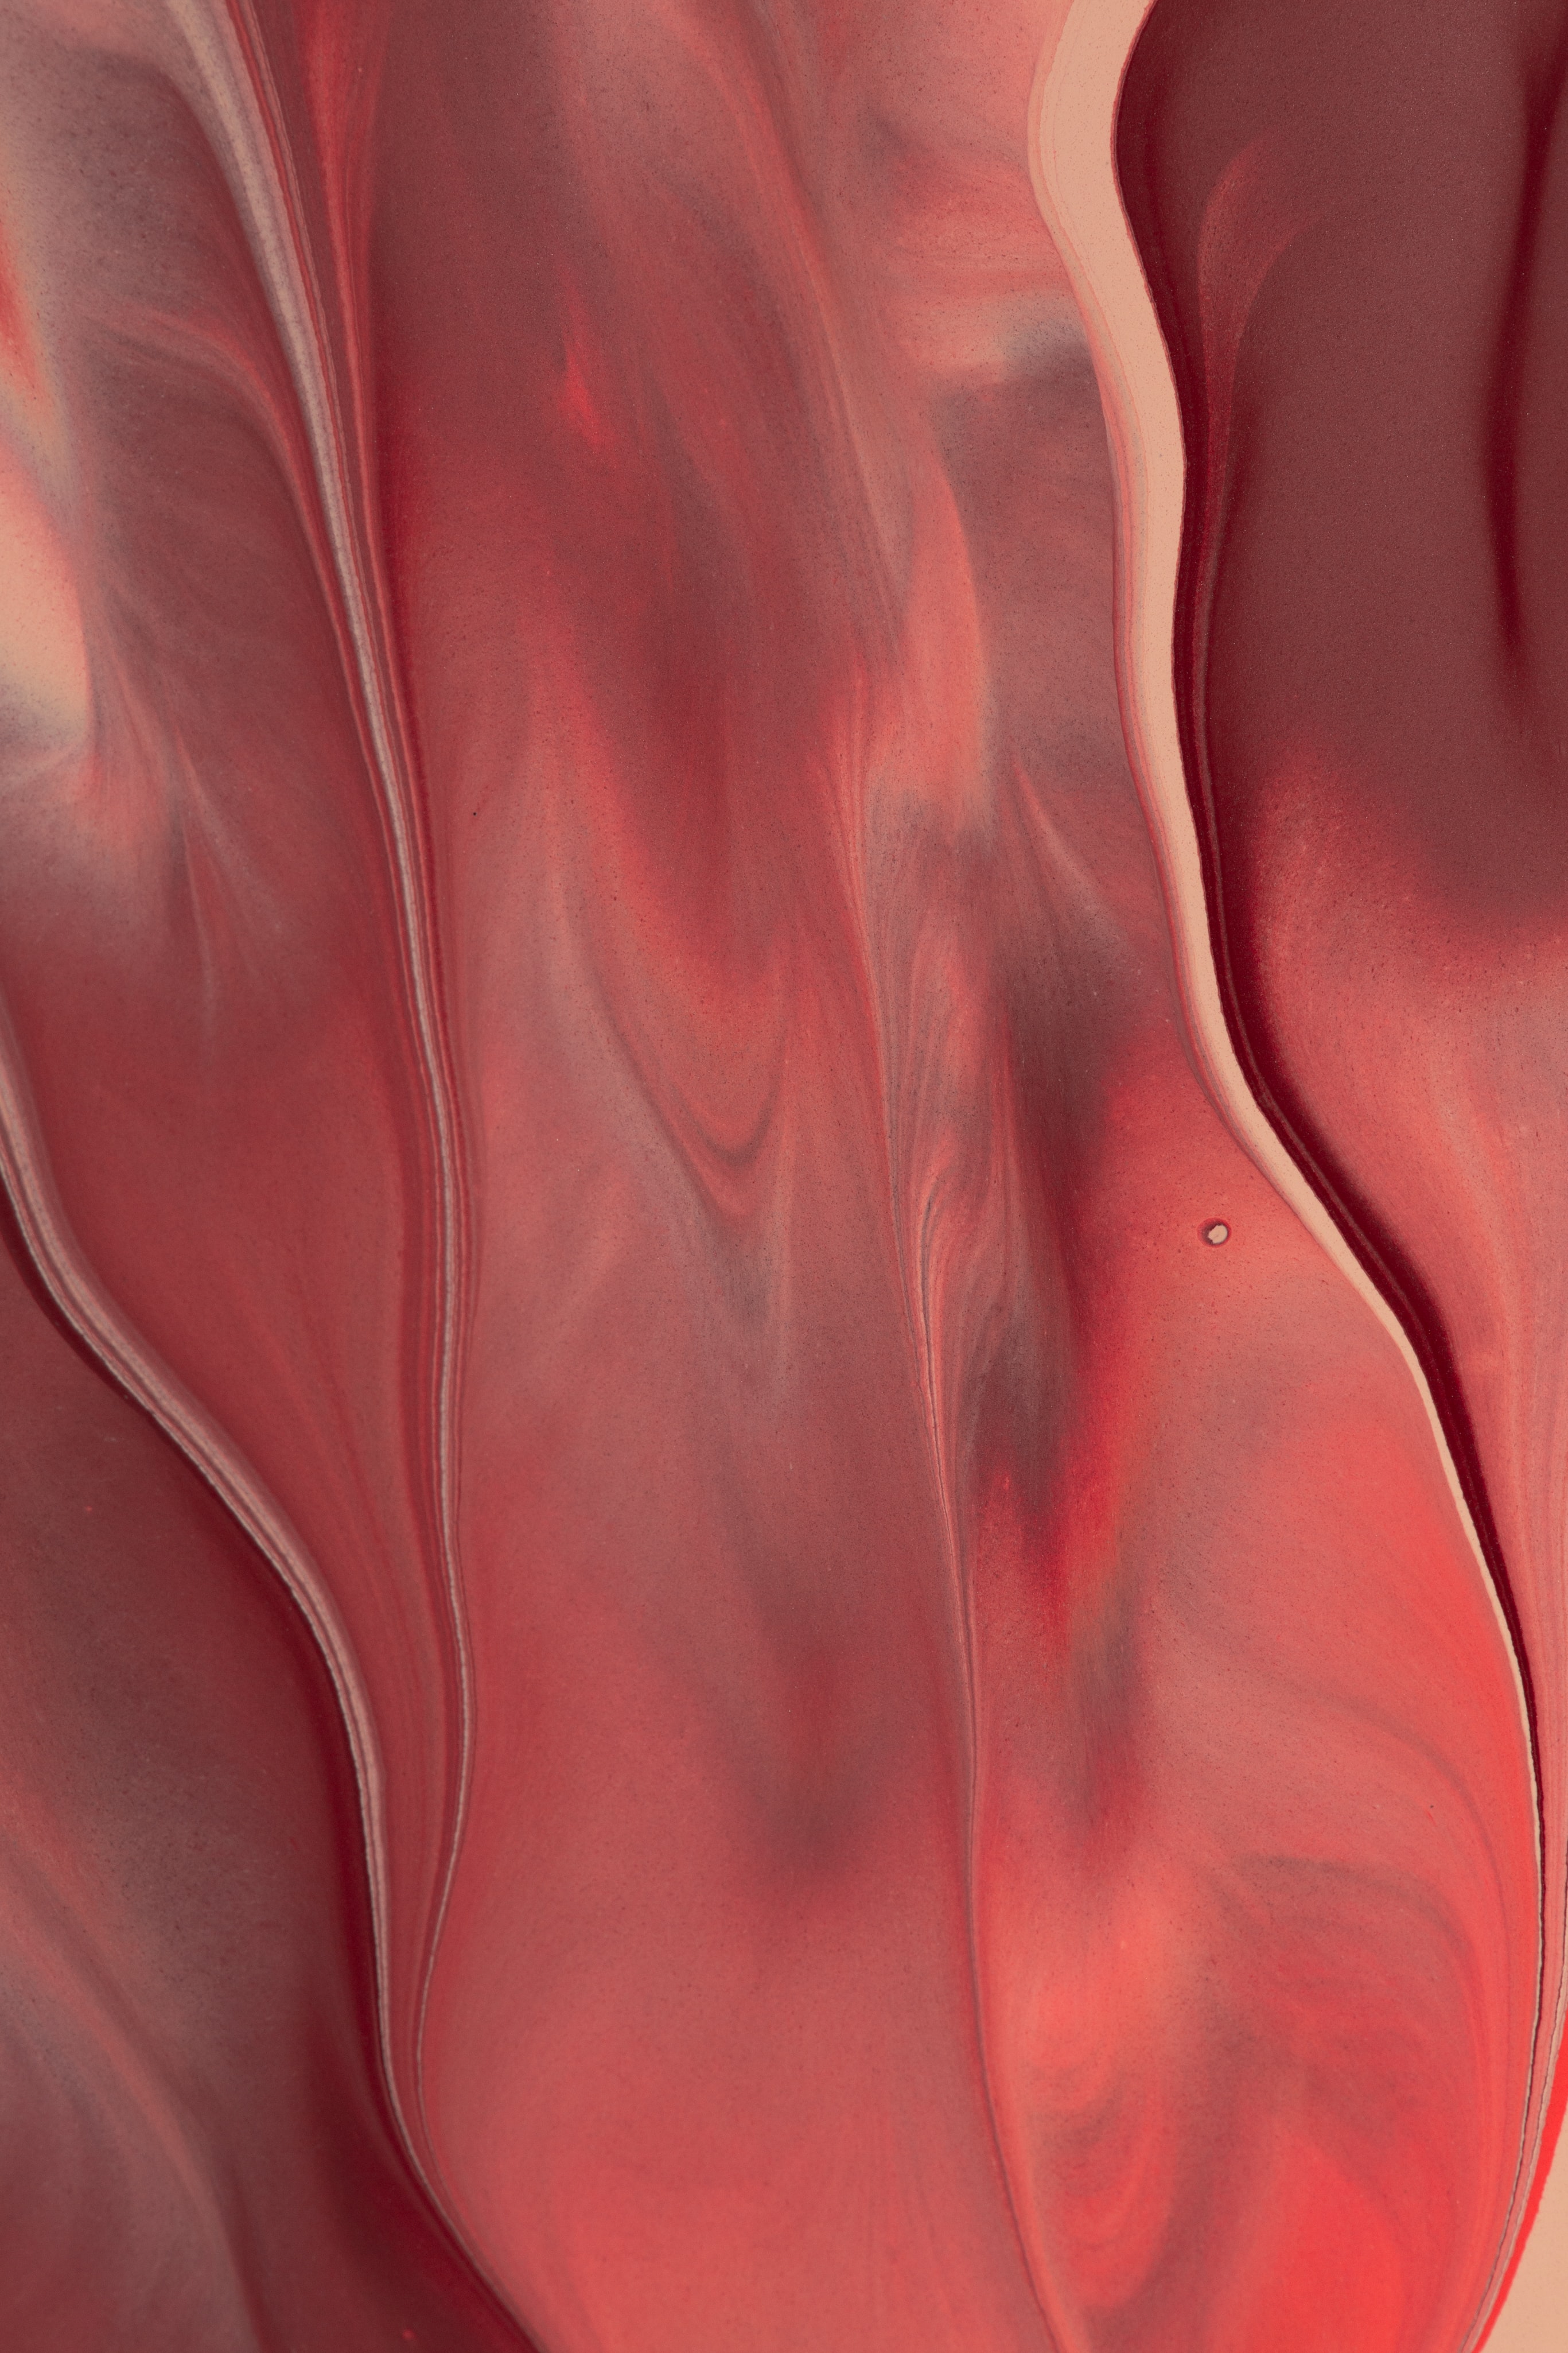 red, paint, liquid, abstract, divorces download HD wallpaper